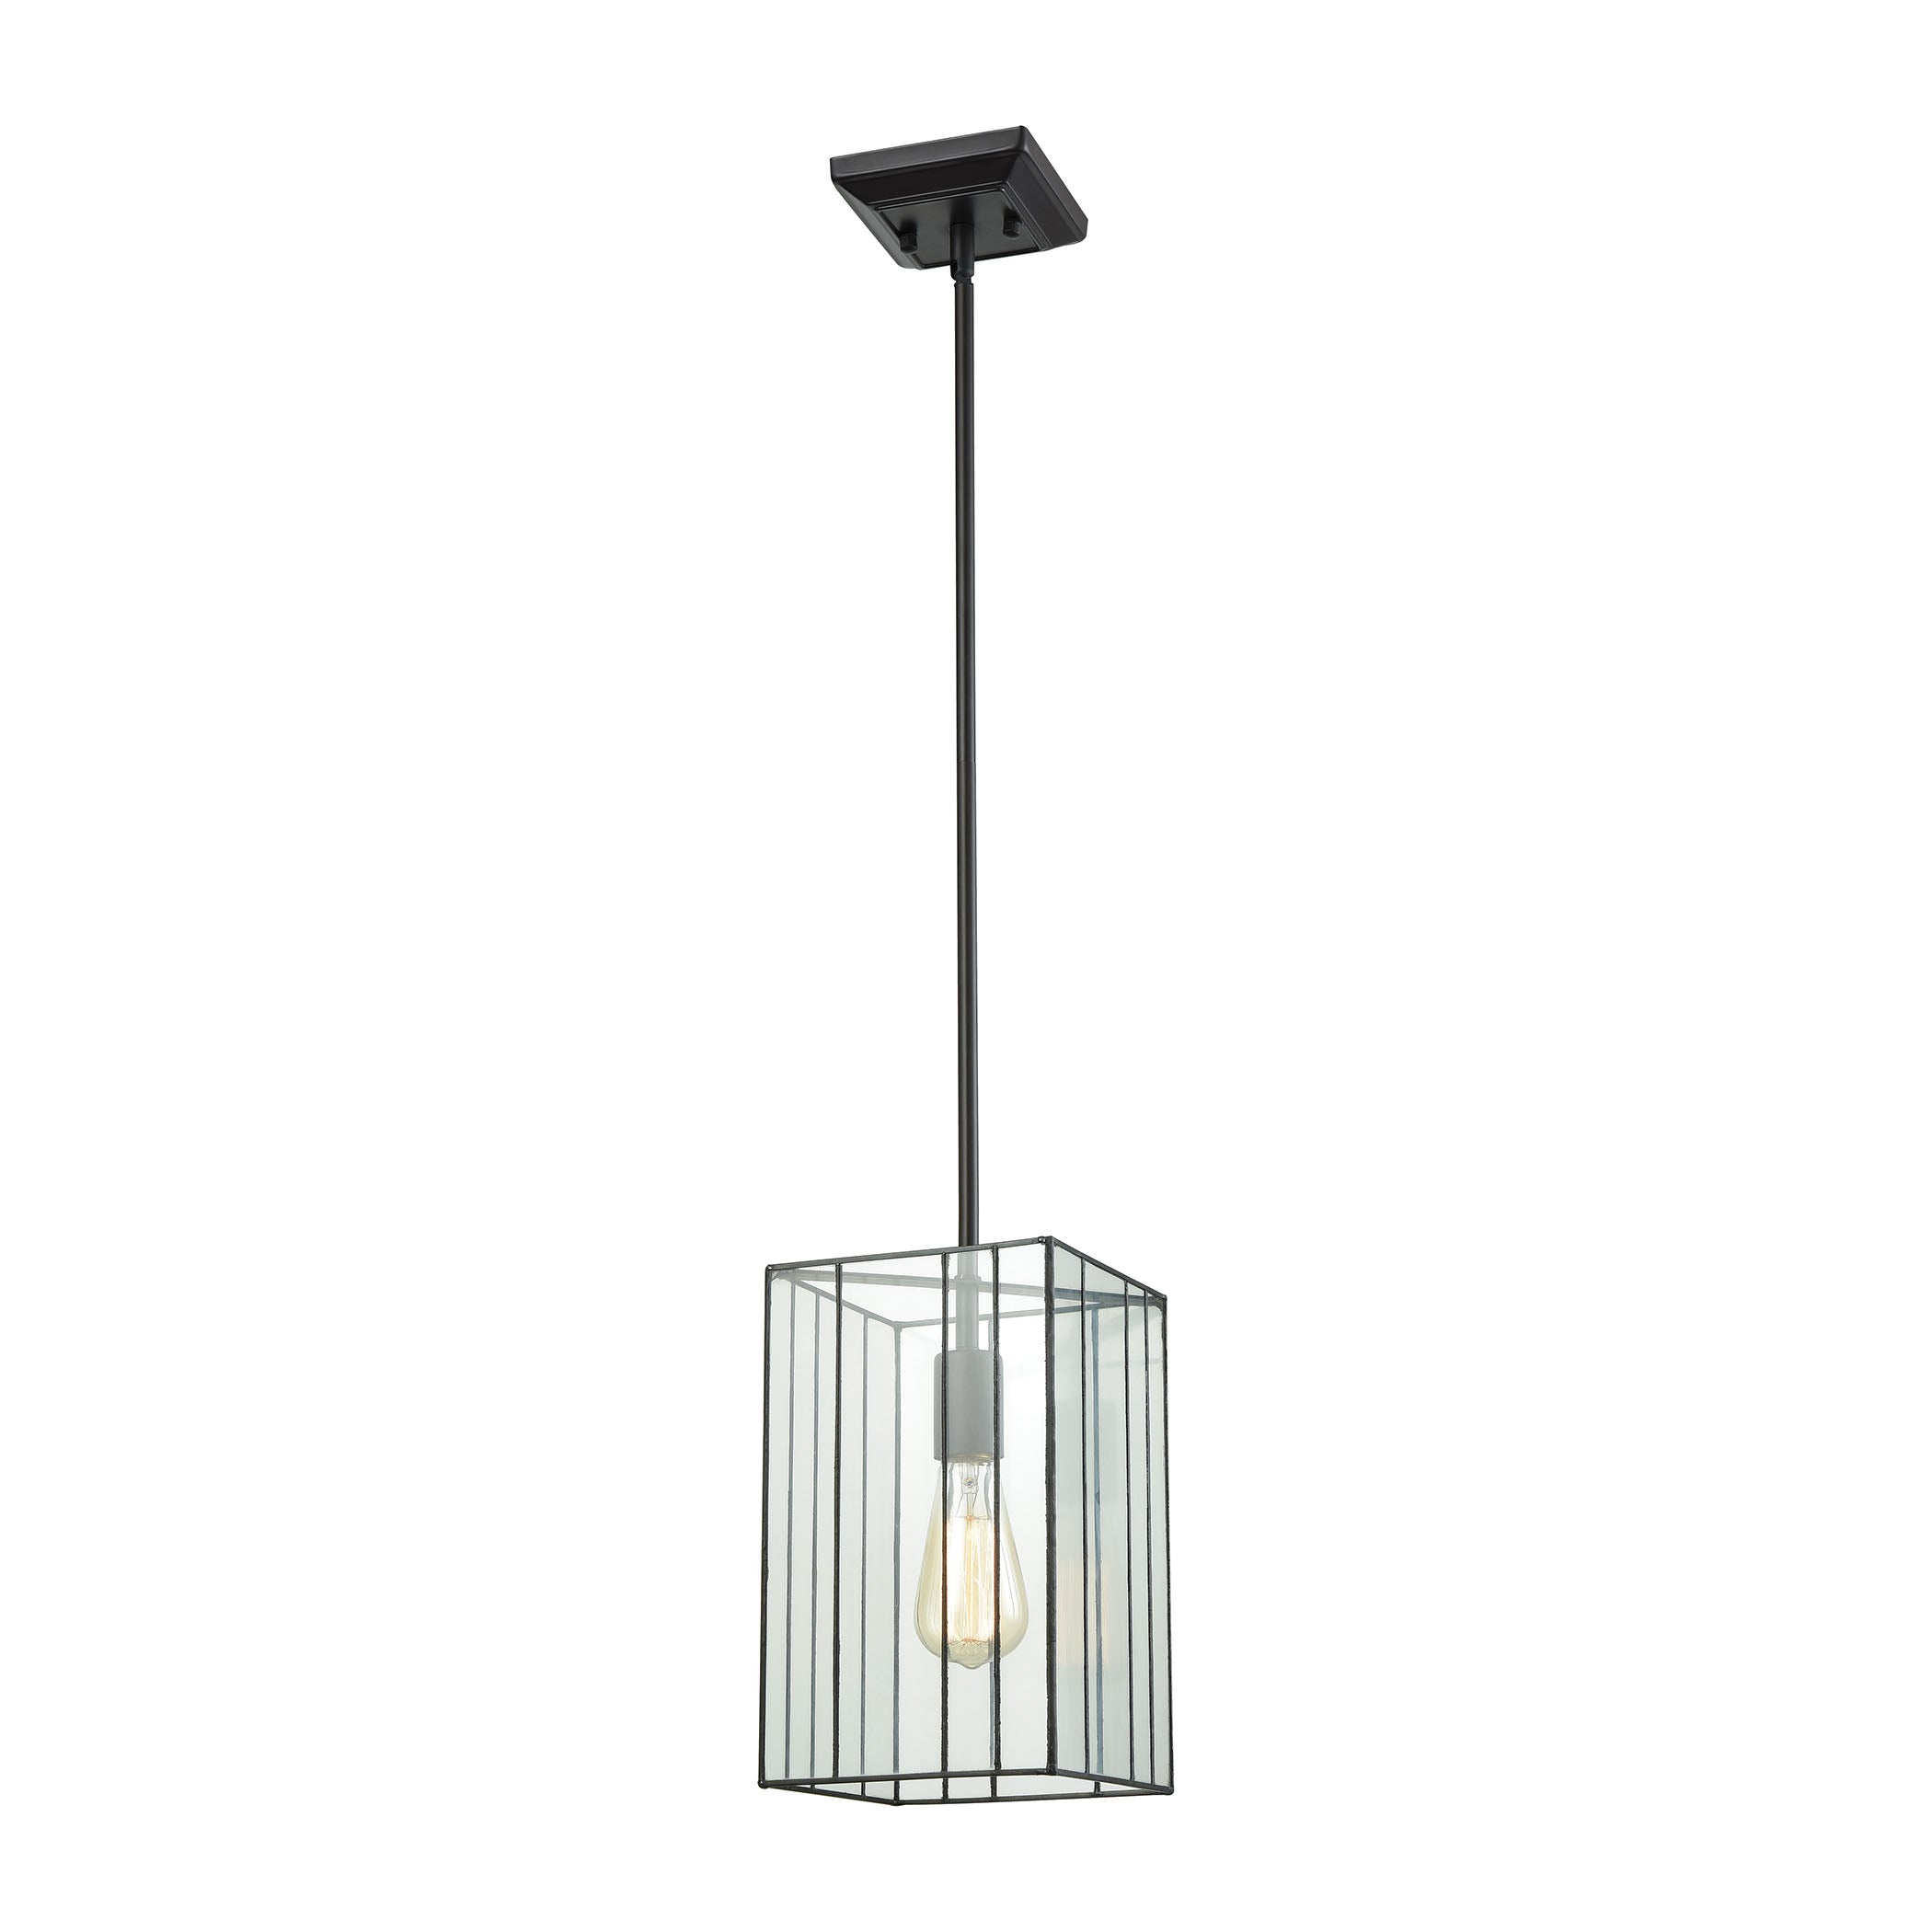 ELK Lighting 72195/1-LA Lucian 1-Light Mini Pendant in Oil Rubbed Bronze with Clear Glass - Includes Adapter Kit